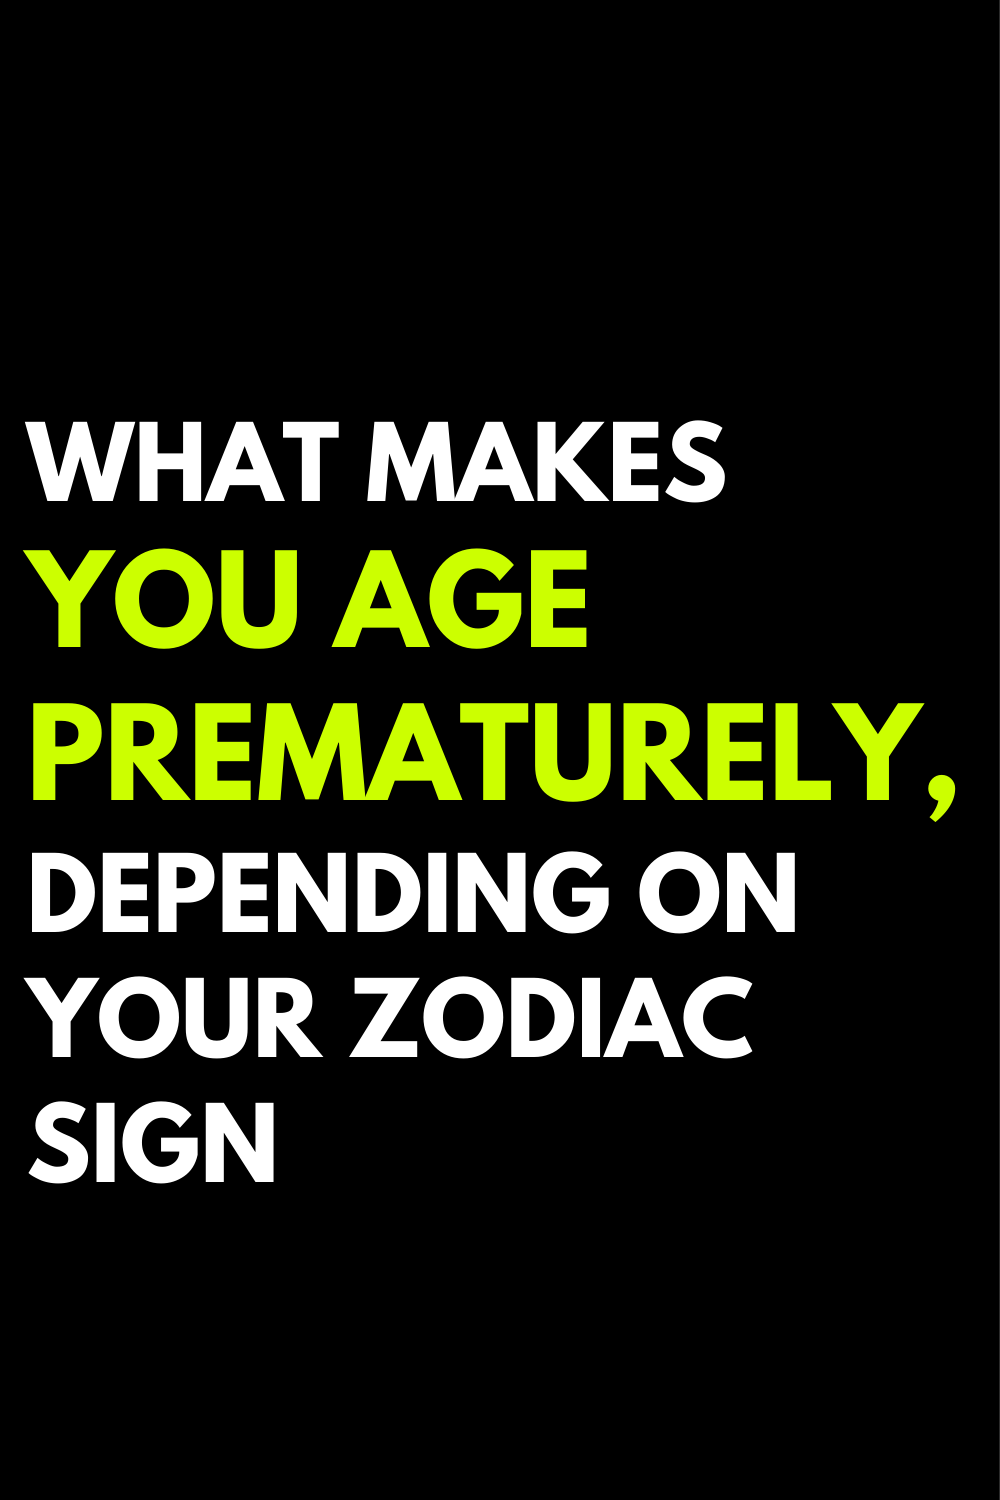 What makes you age prematurely, depending on your zodiac sign